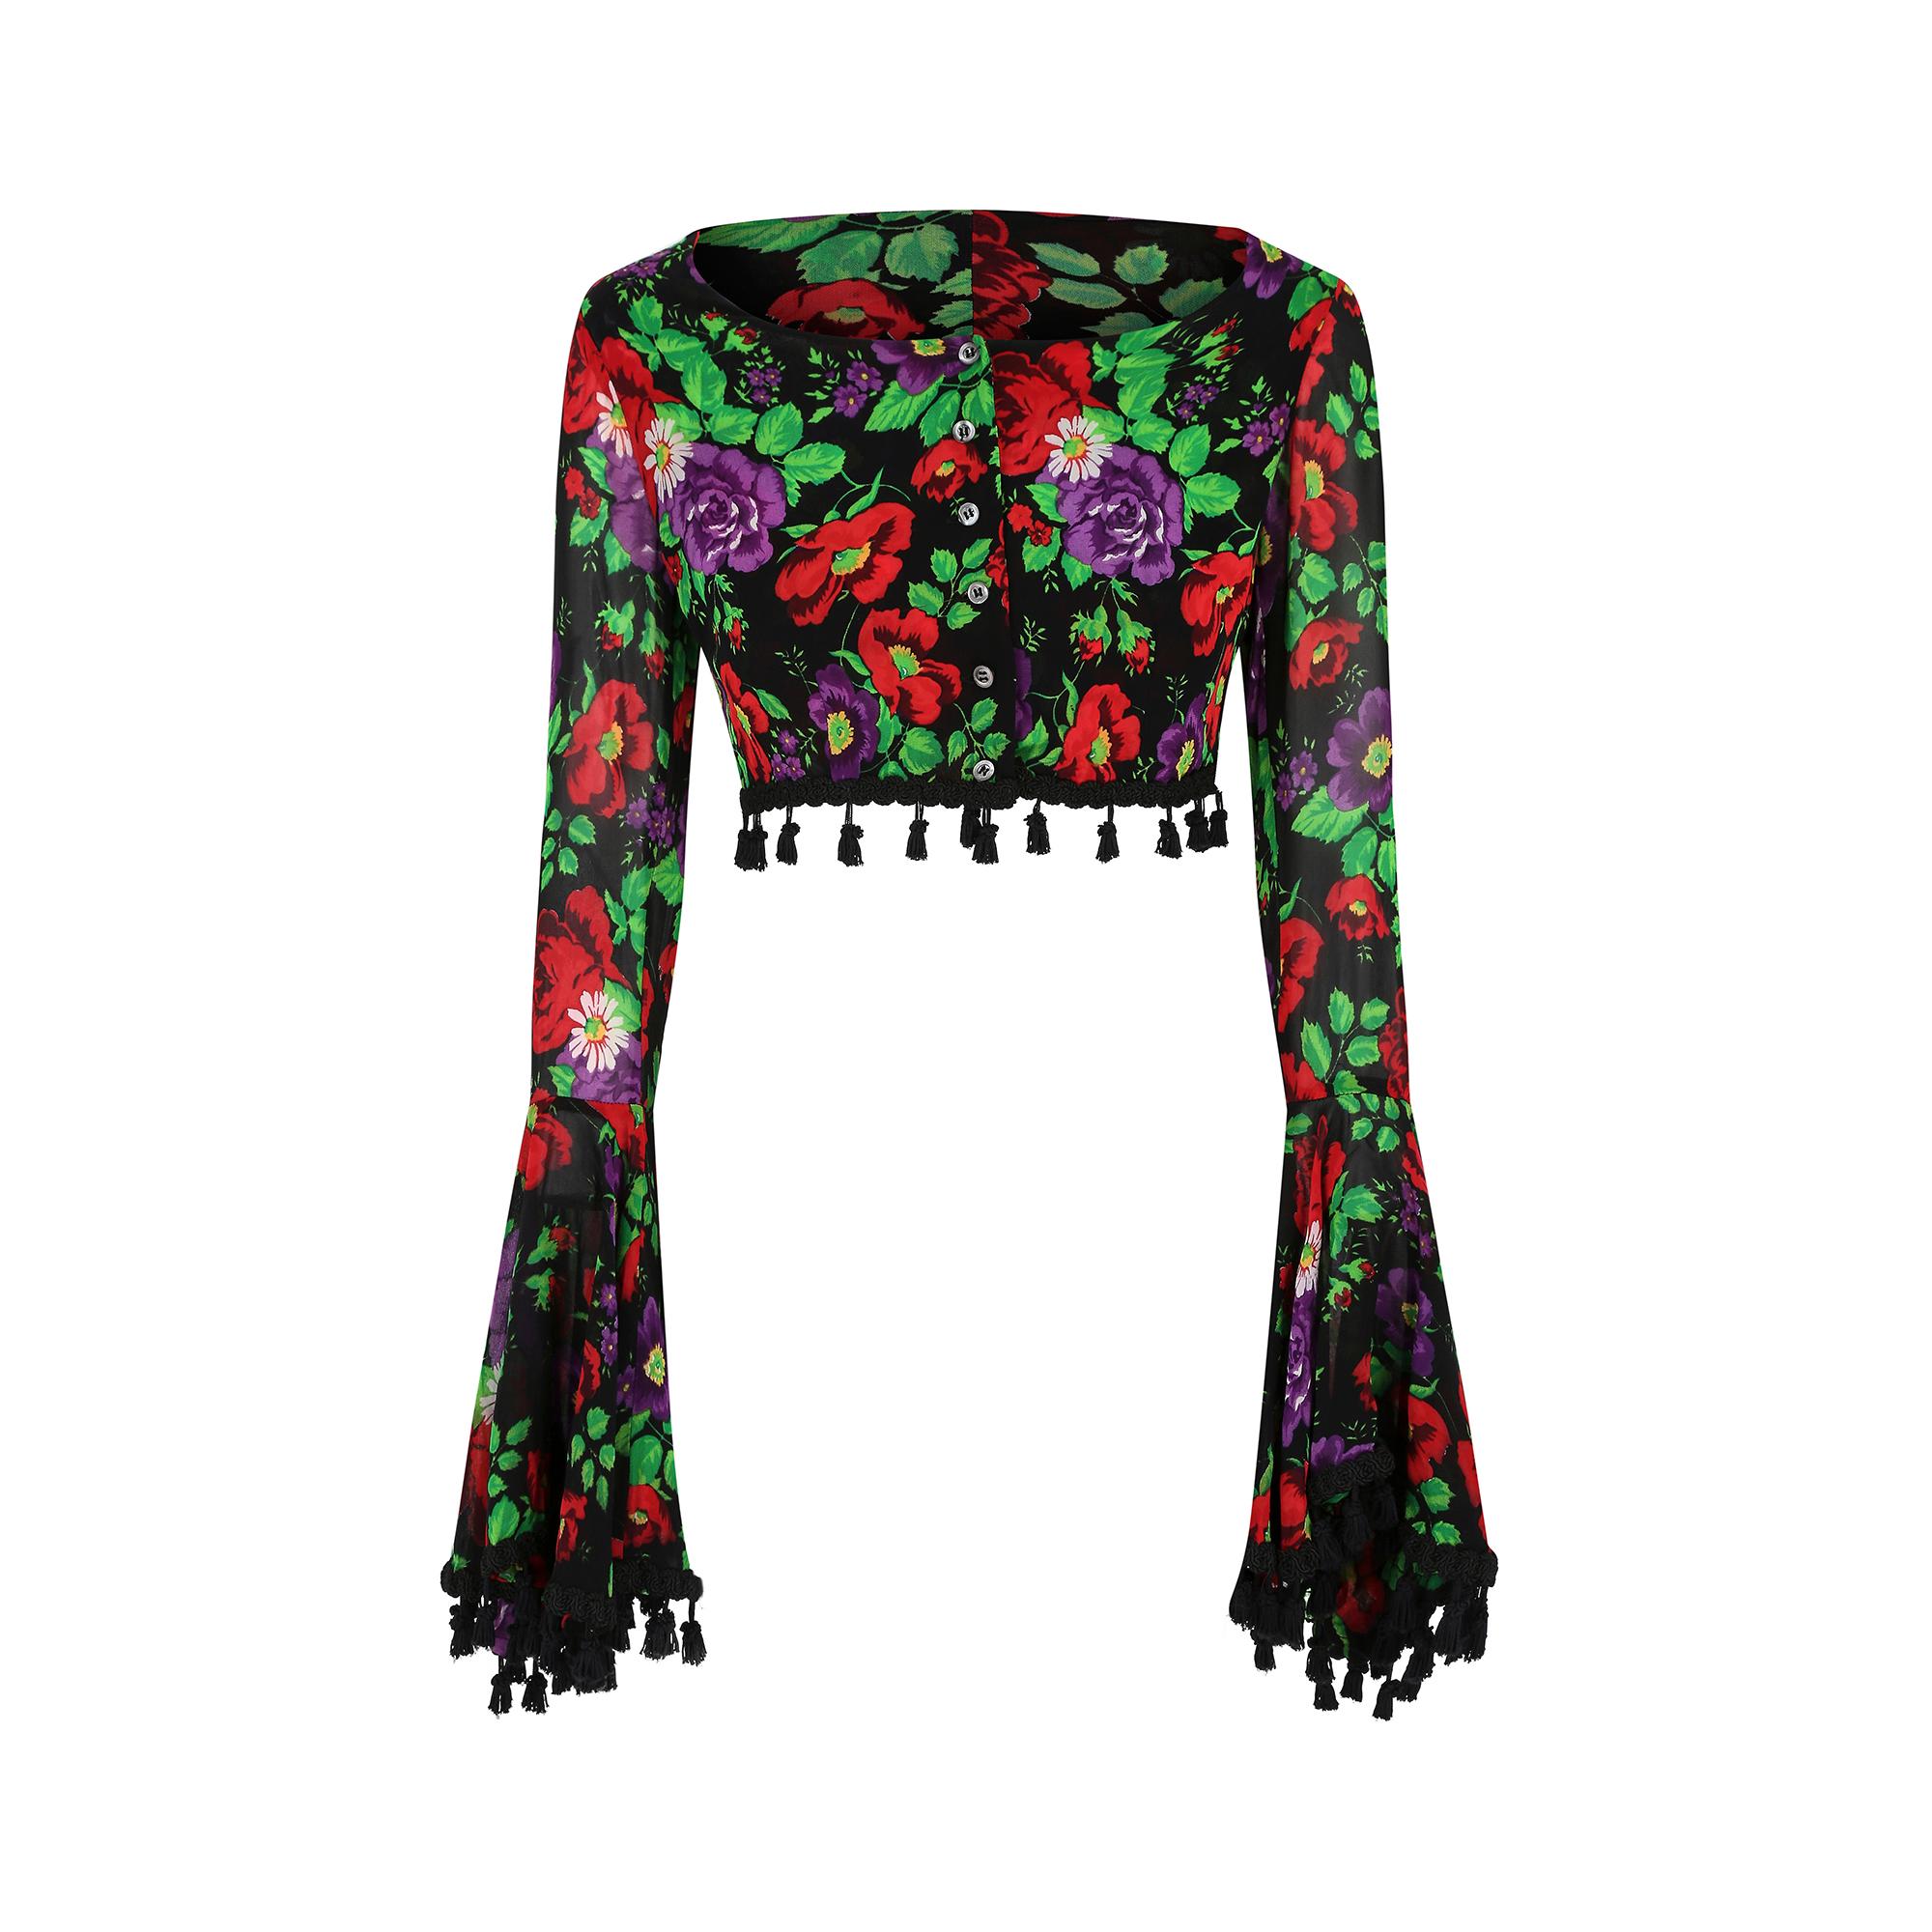 Rare and early Dolce and Gabbana cropped floral blouse from the spring summer 1994 collection.  It has these extraordinary trumpet sleeves that are edged in passementerie black trim with little toggles which are also echoed around the neck. The